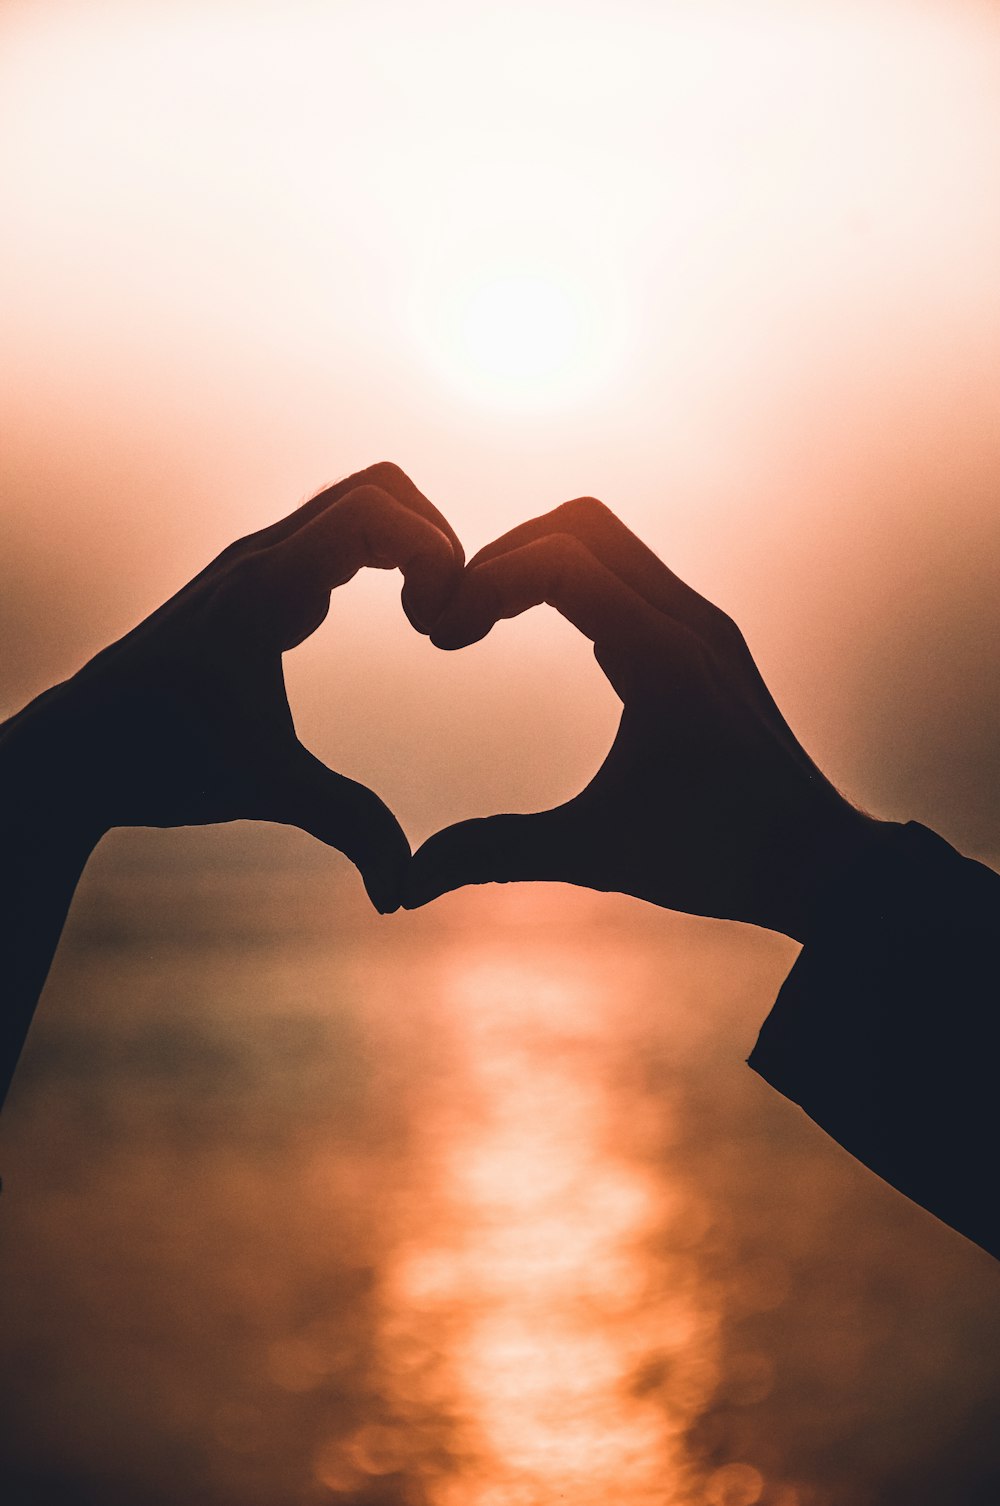 100 Love Images Hd Download Free Professional Photos On Unsplash